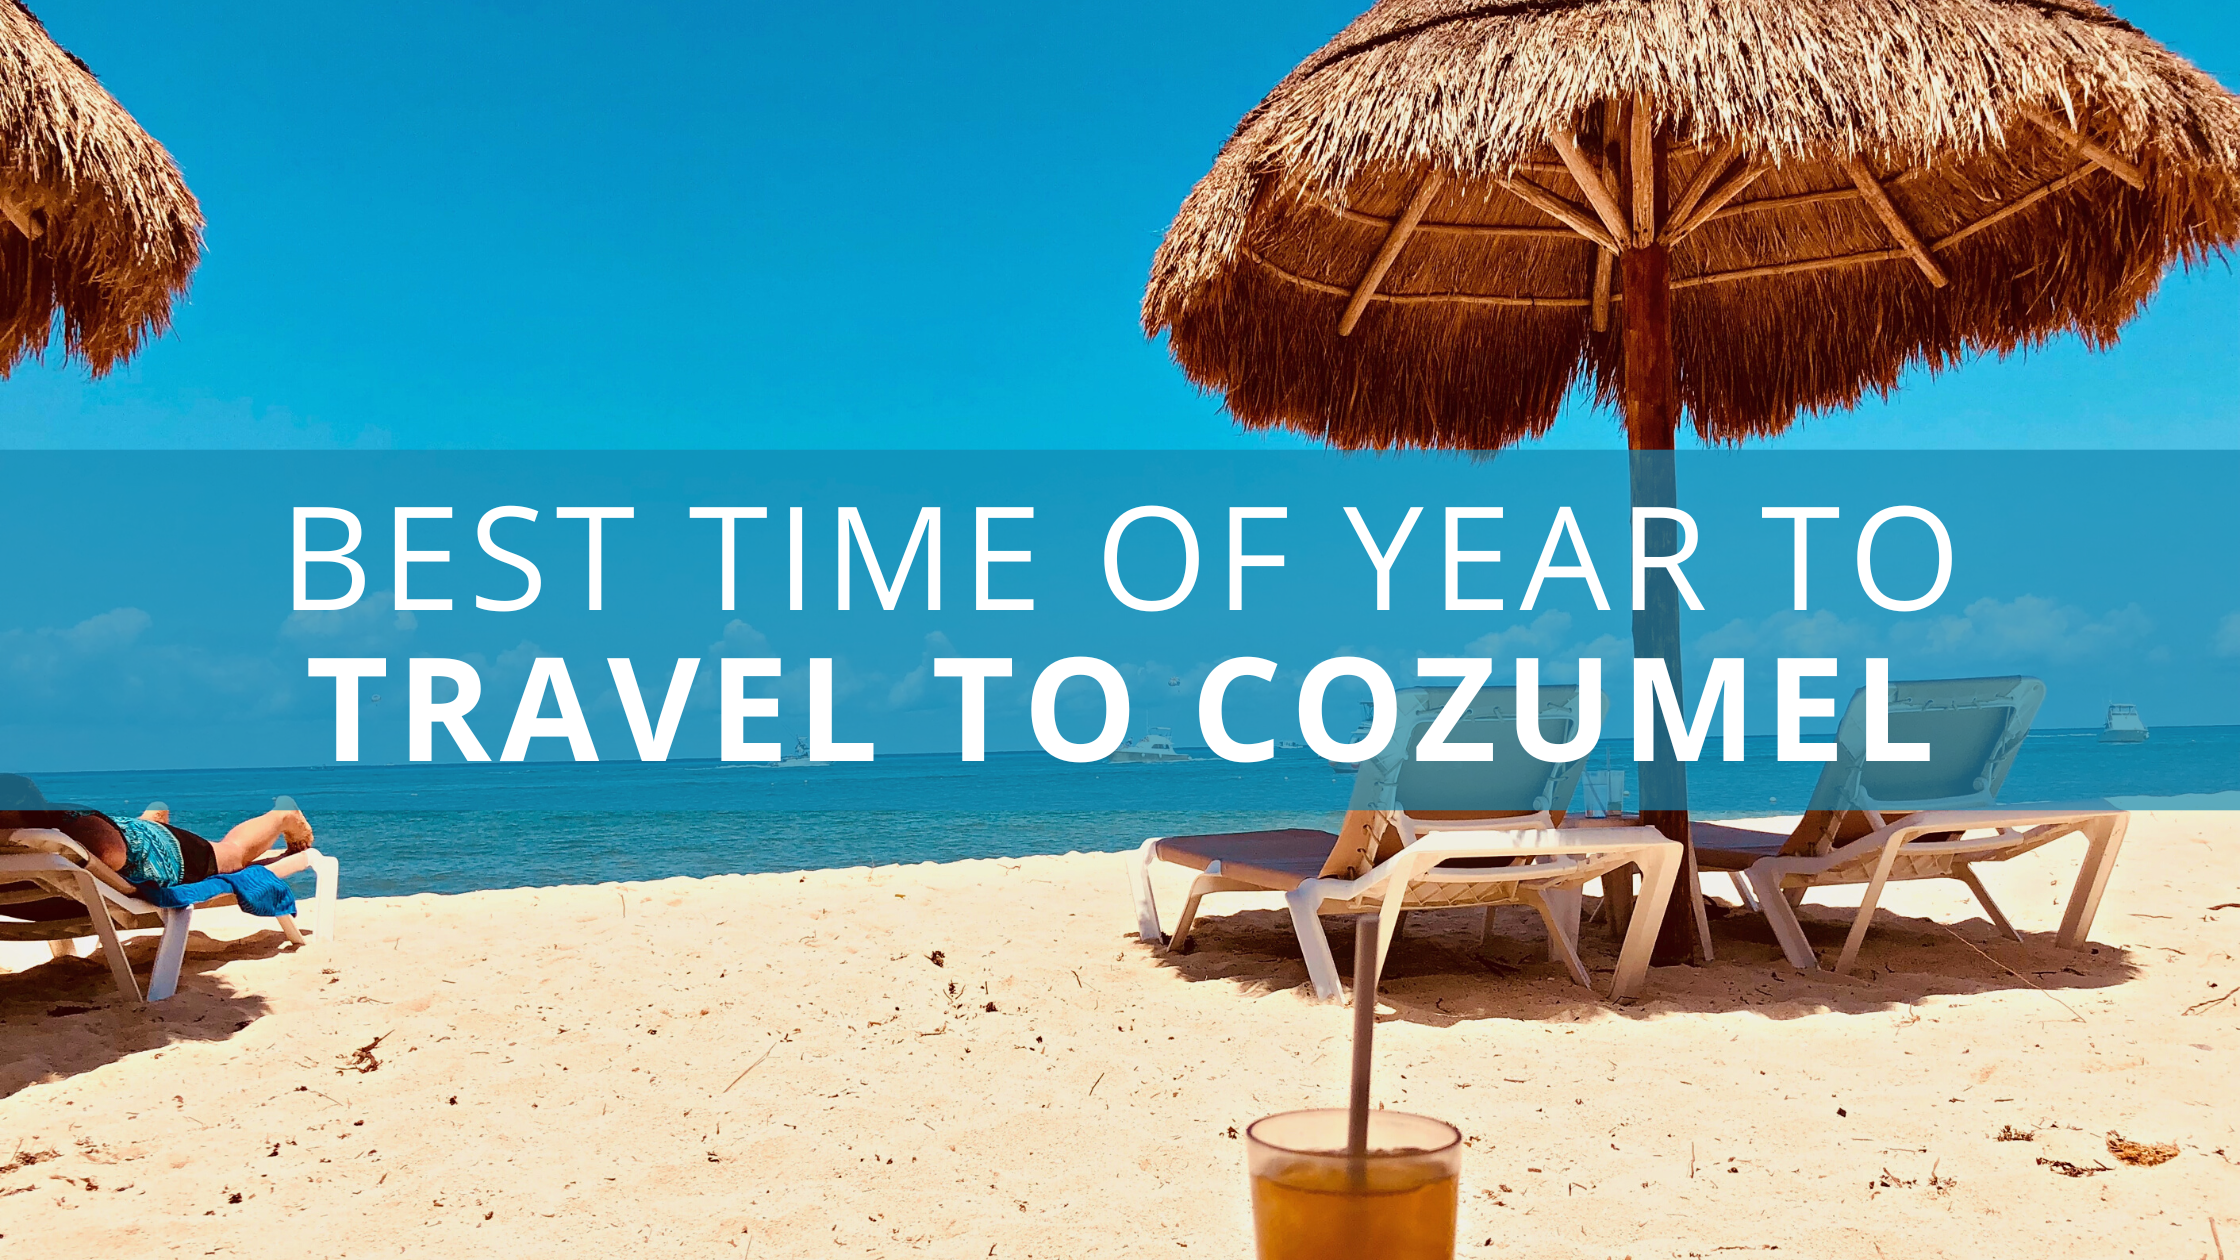 Best Time of Year to Travel to Cozumel